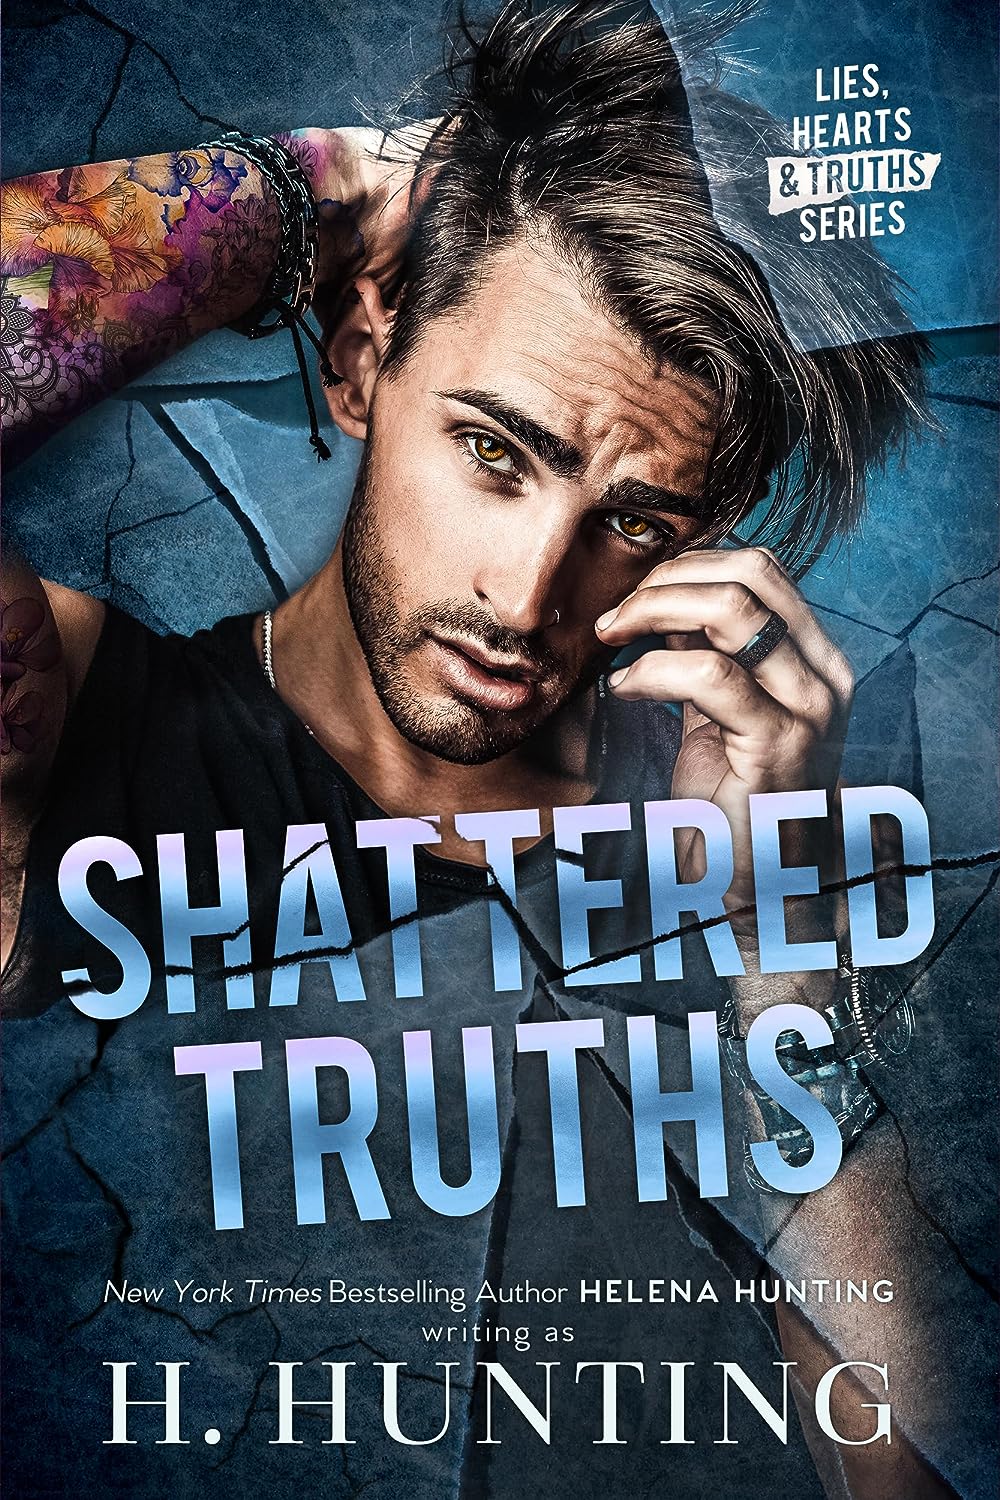 Shattered Truths by H Hunting 🏒 ⛸️ 5 ⭐!